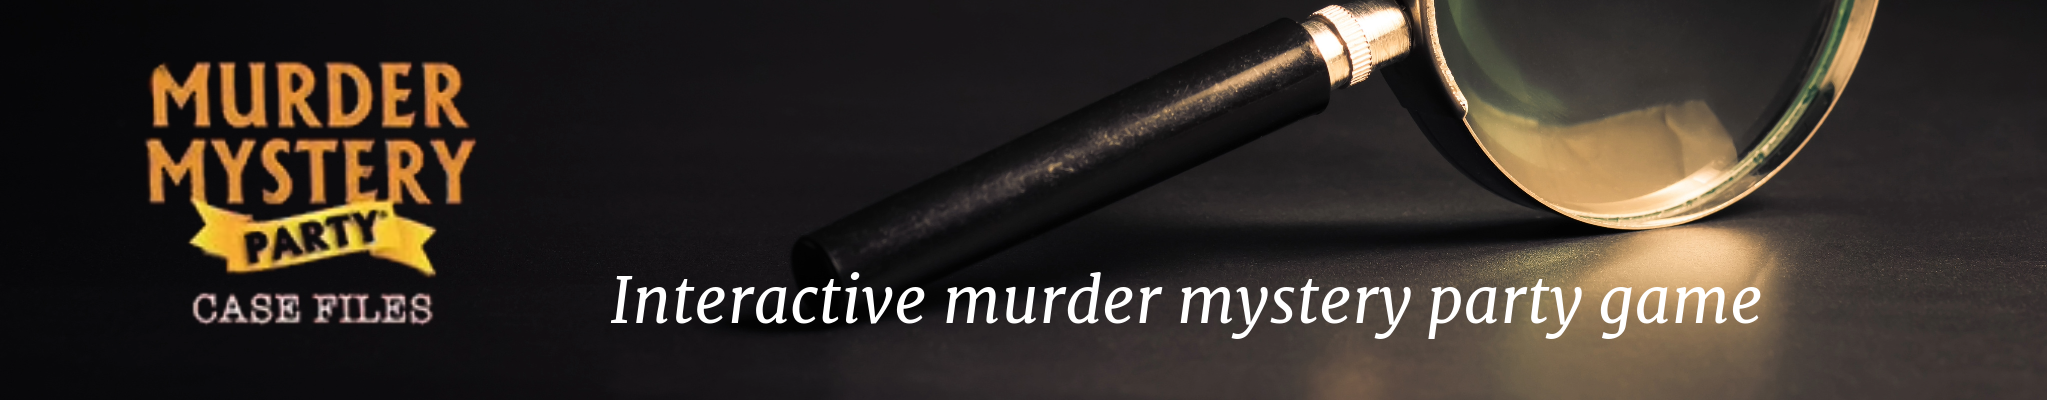 Murder Mystery Party Banner